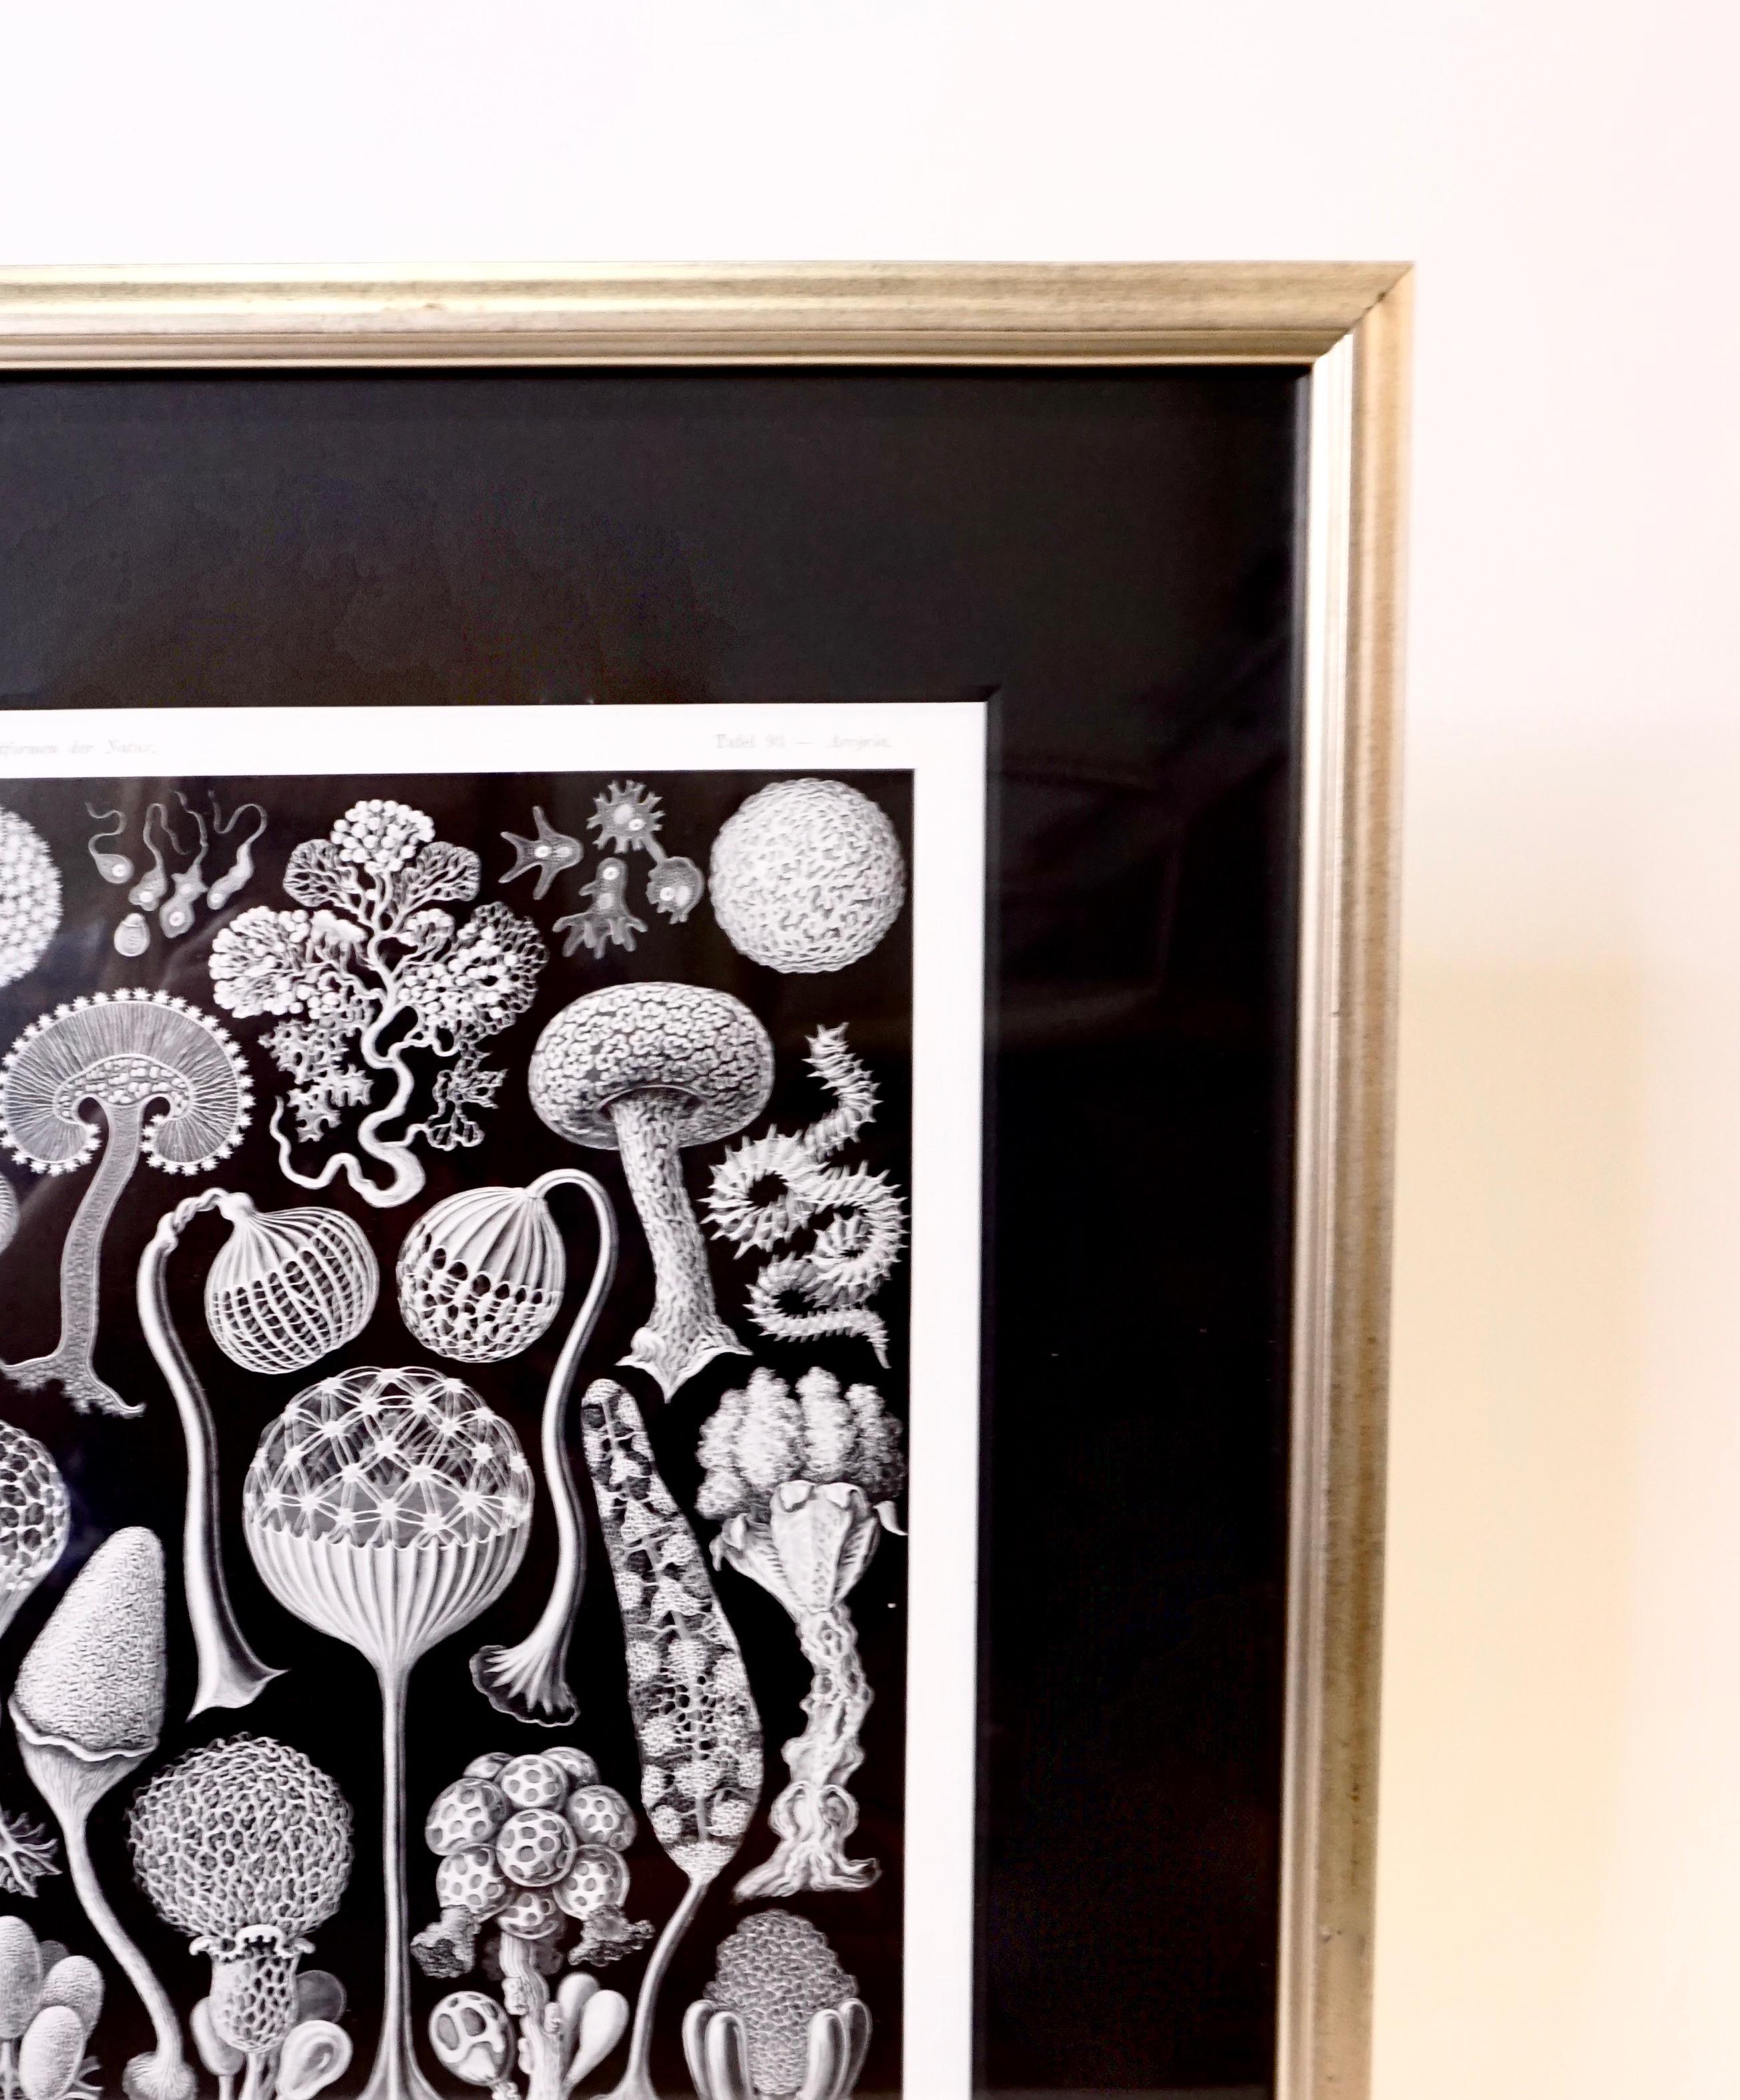 Art Forms of Nature by Ernst Haeckel, Mycetozoa In Good Condition For Sale In Dallas, TX